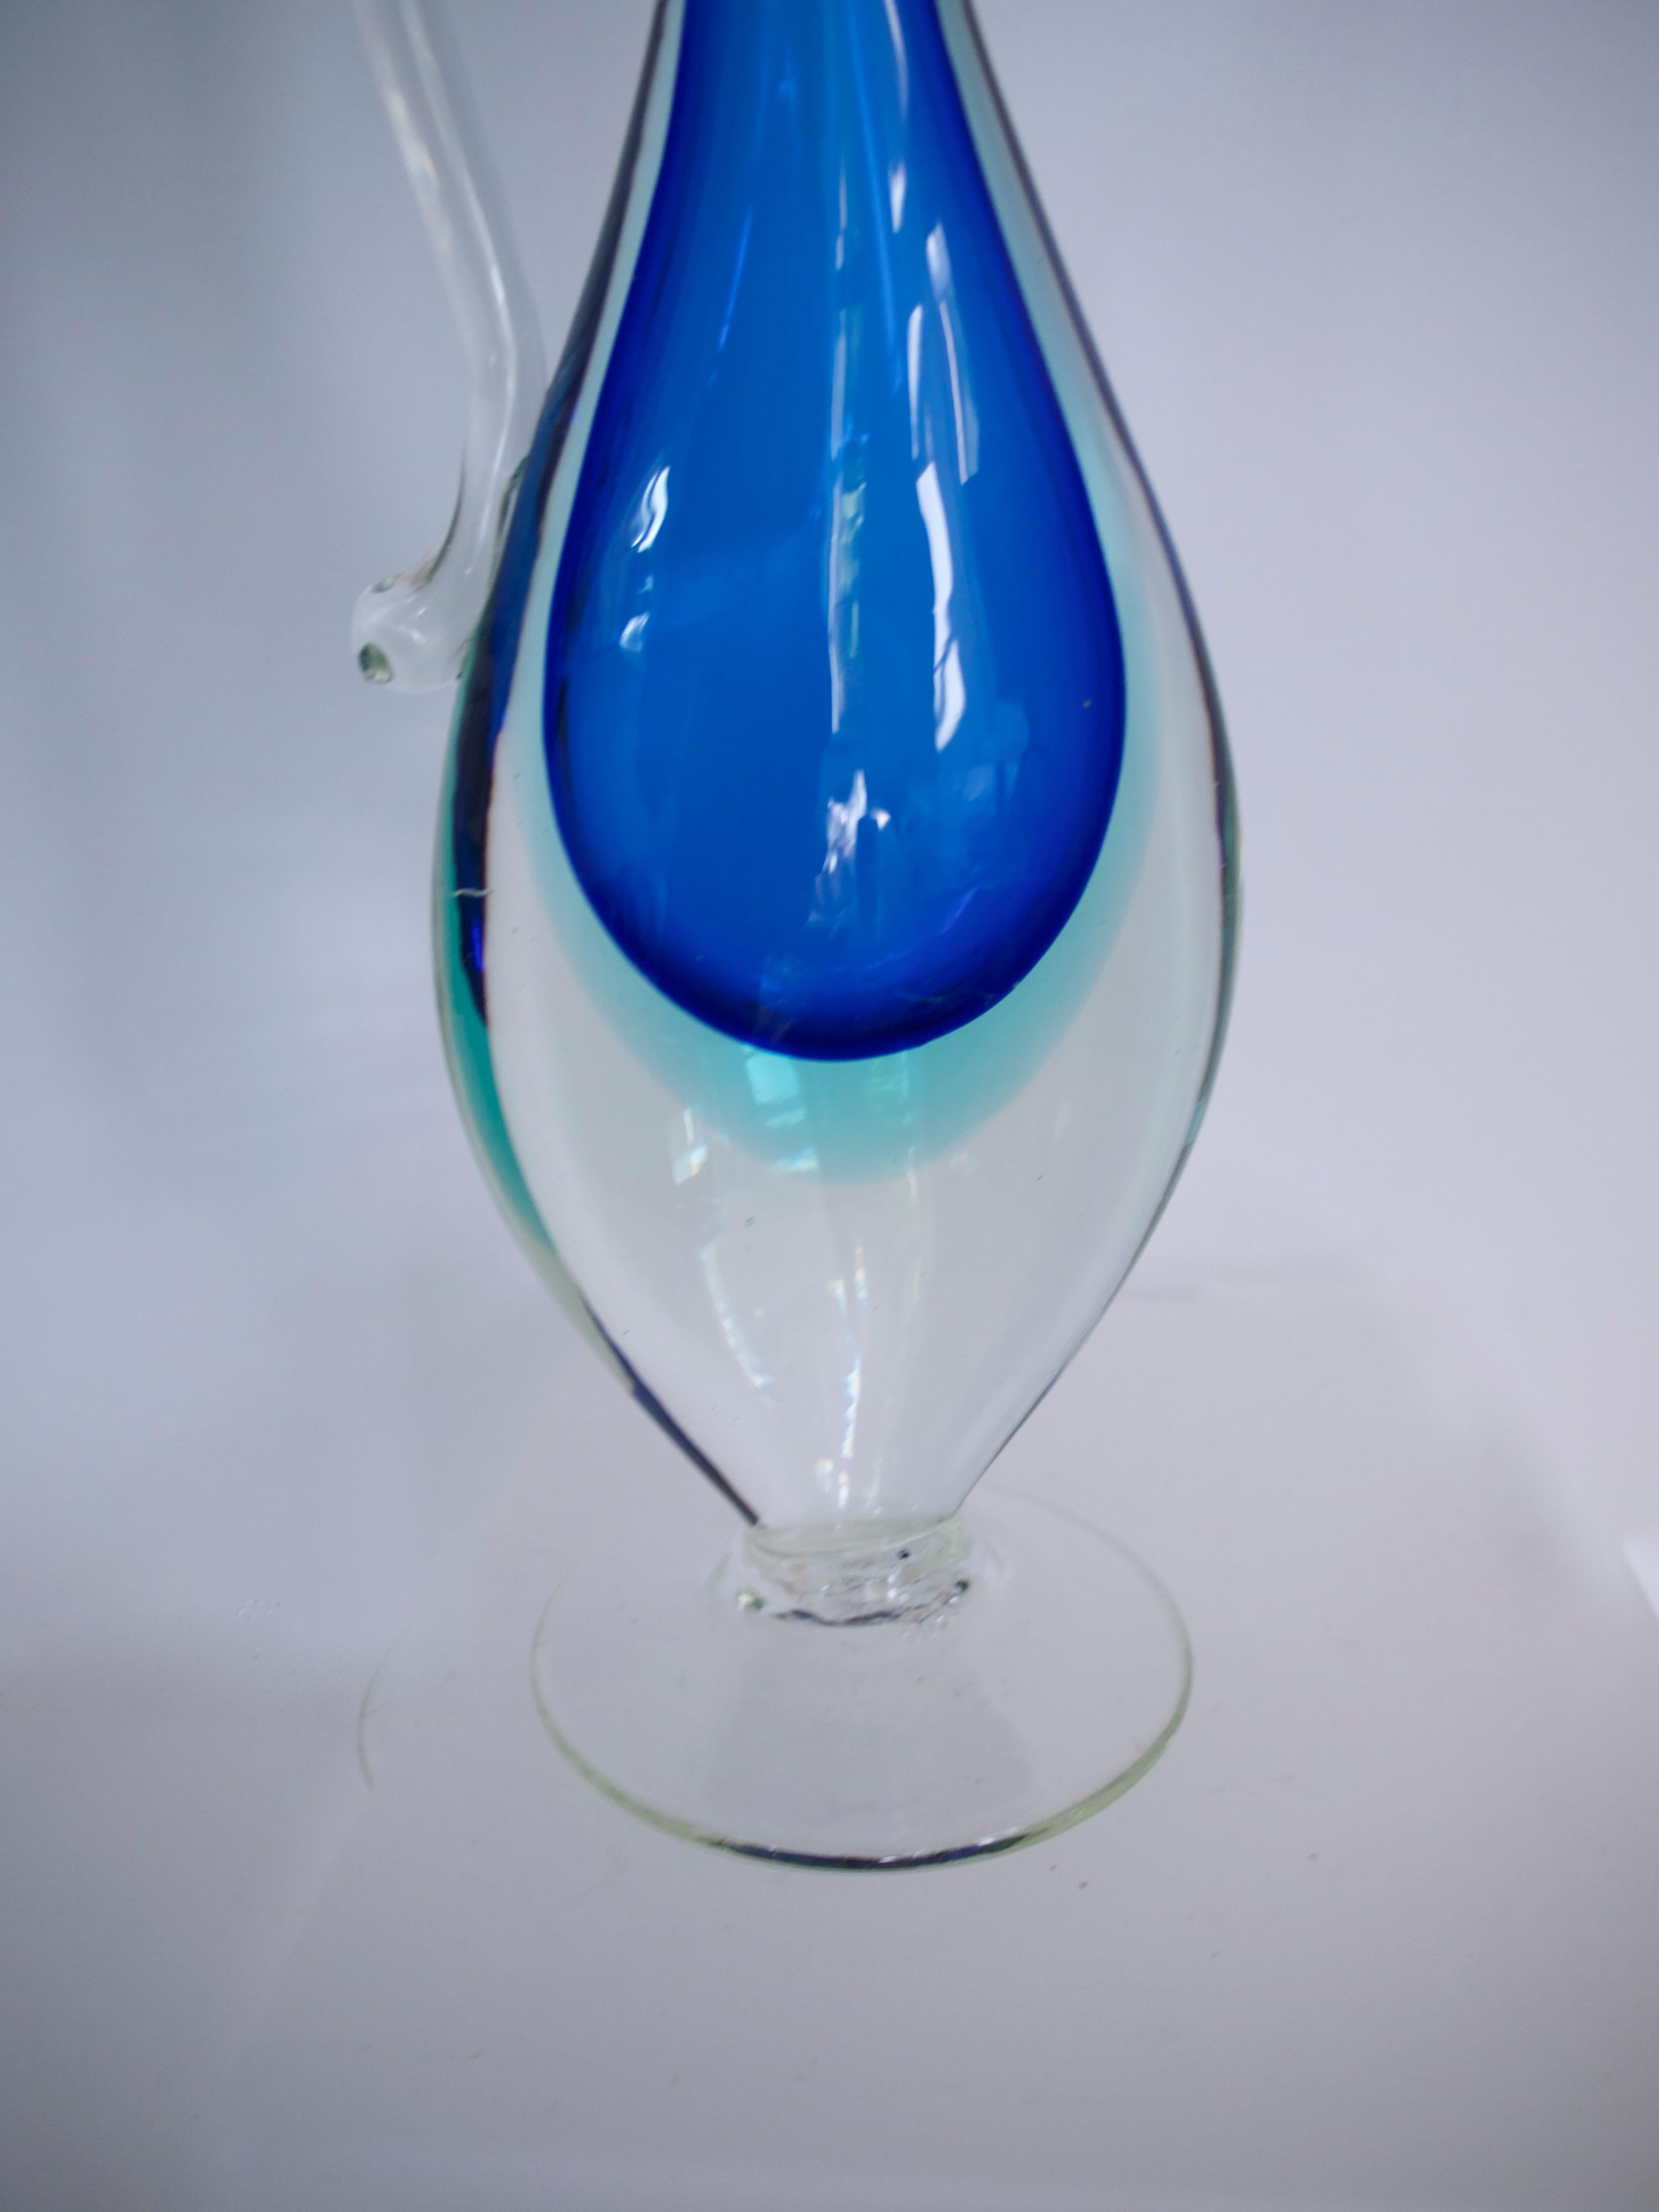 Late 20th Century Pair of Murano Sommerso Glass Vases/Pitchers in Layered Shades of Blue, 1980s For Sale